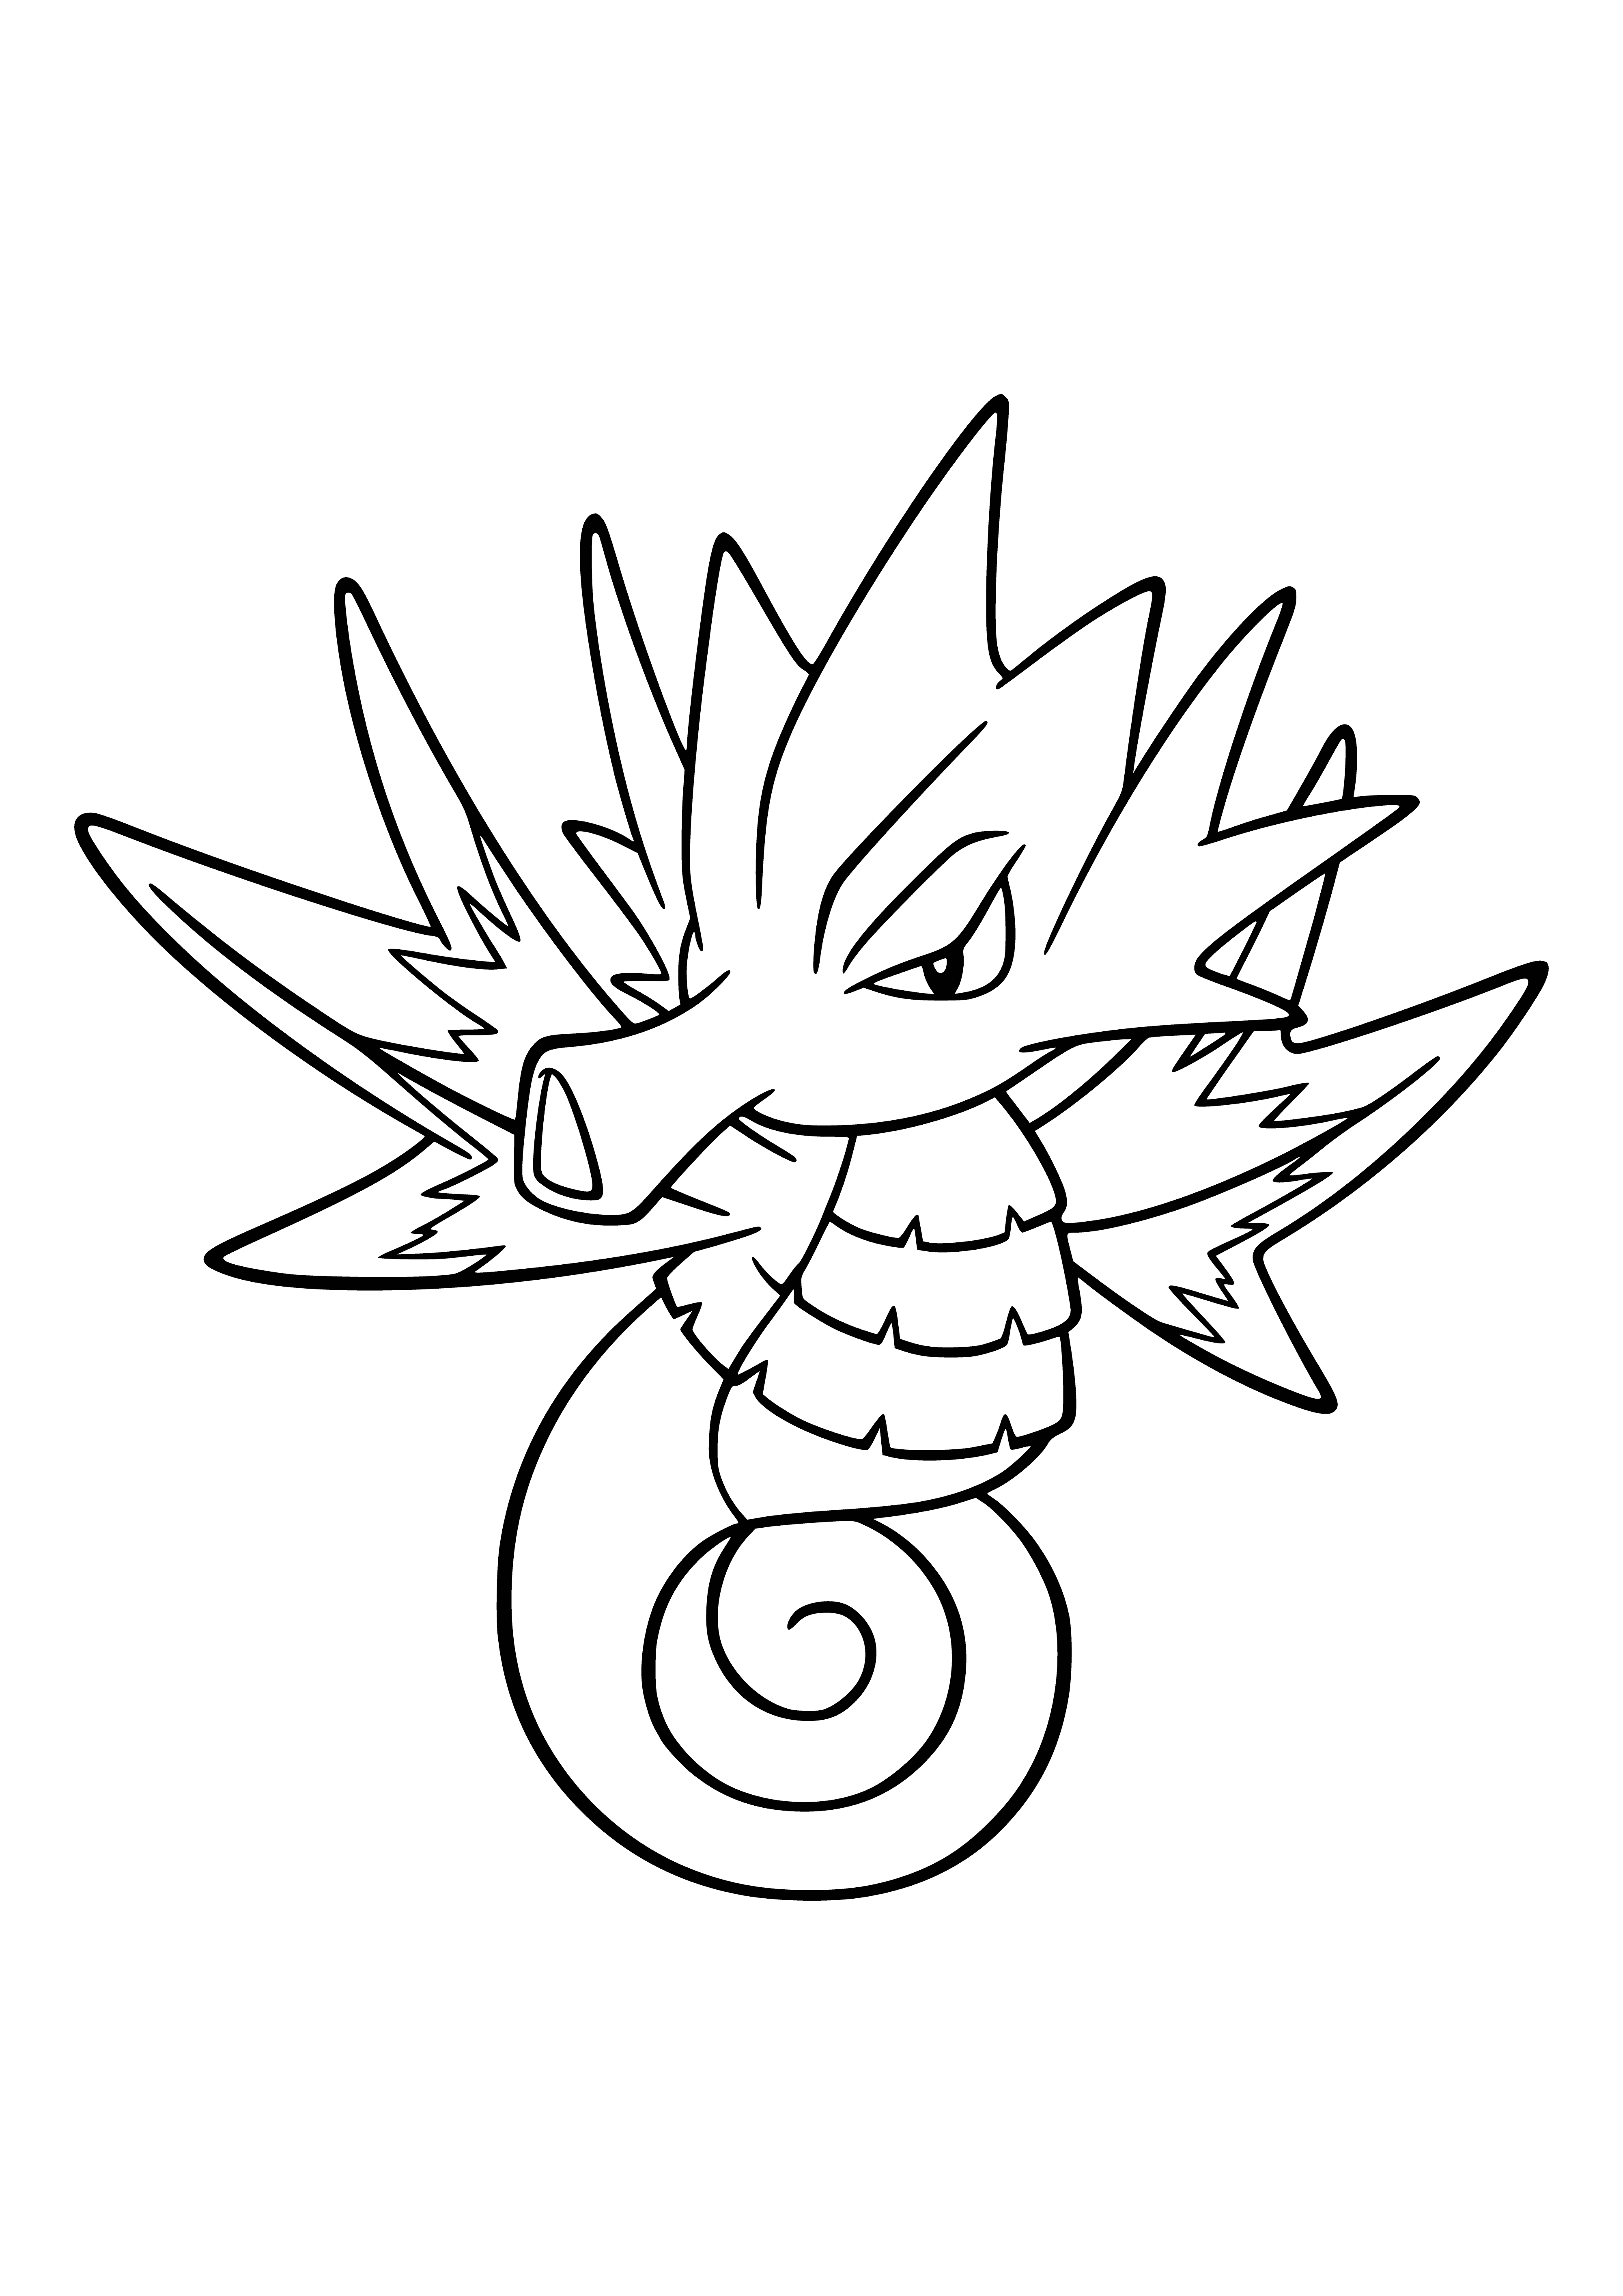 coloring page: Sidra is a majestic blue Pokemon, powerful with the ability to control water. Has long fins, tail & horn, and deep blue eyes.